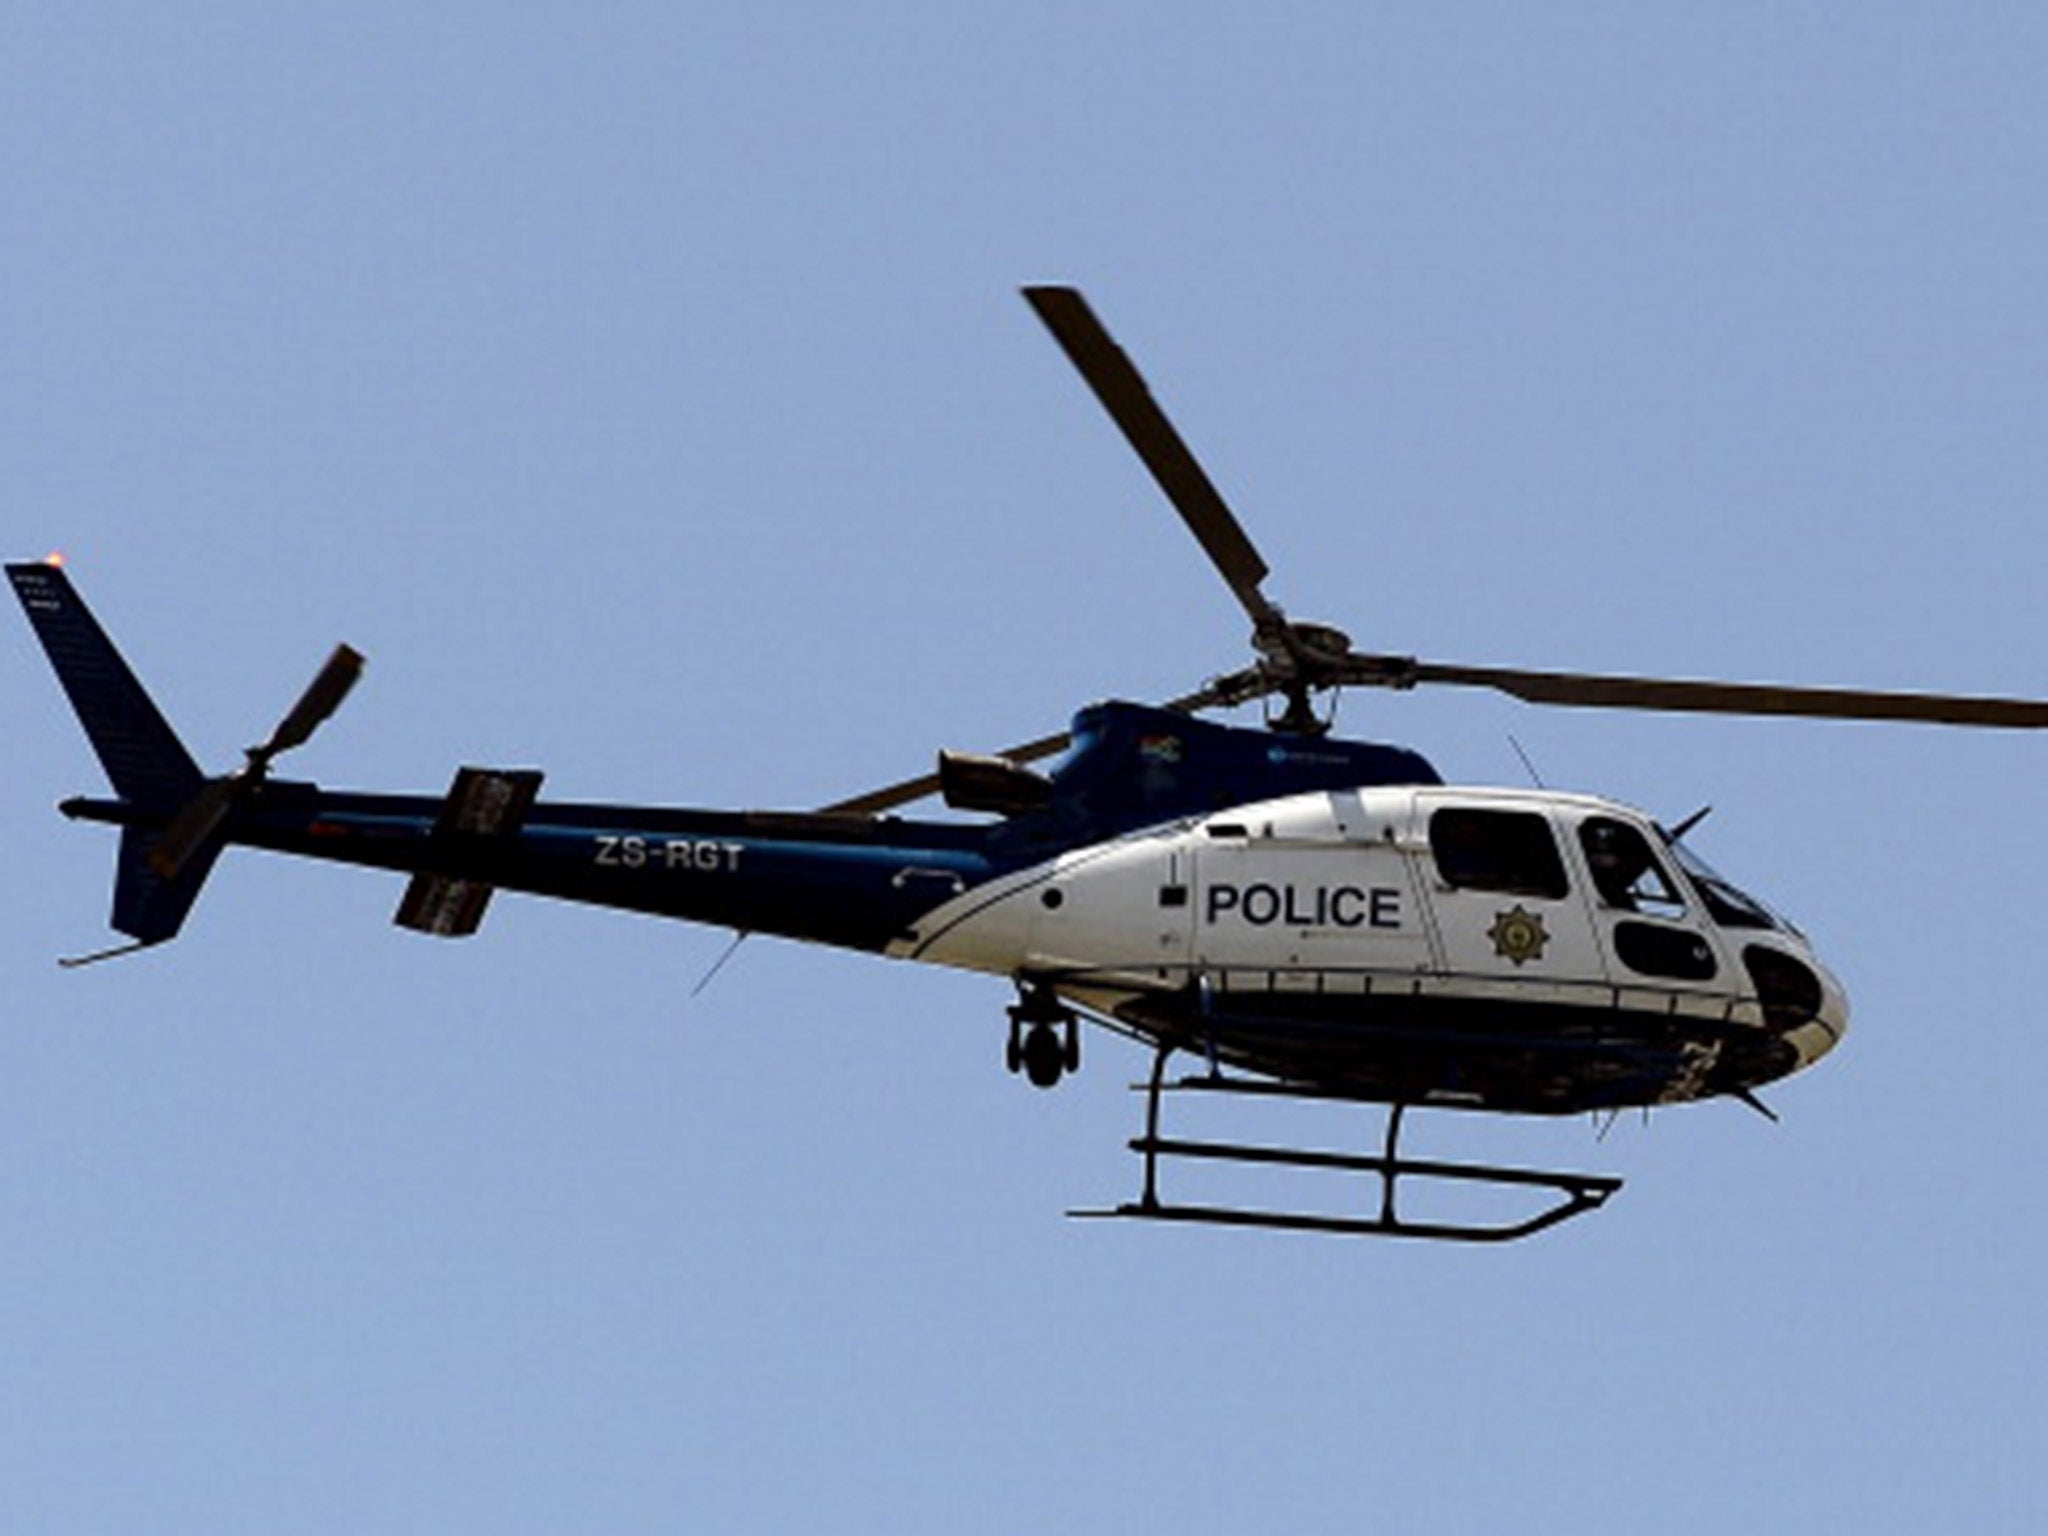 Police helicopter crew in Canada was involved in embarrassing loudspeaker accident